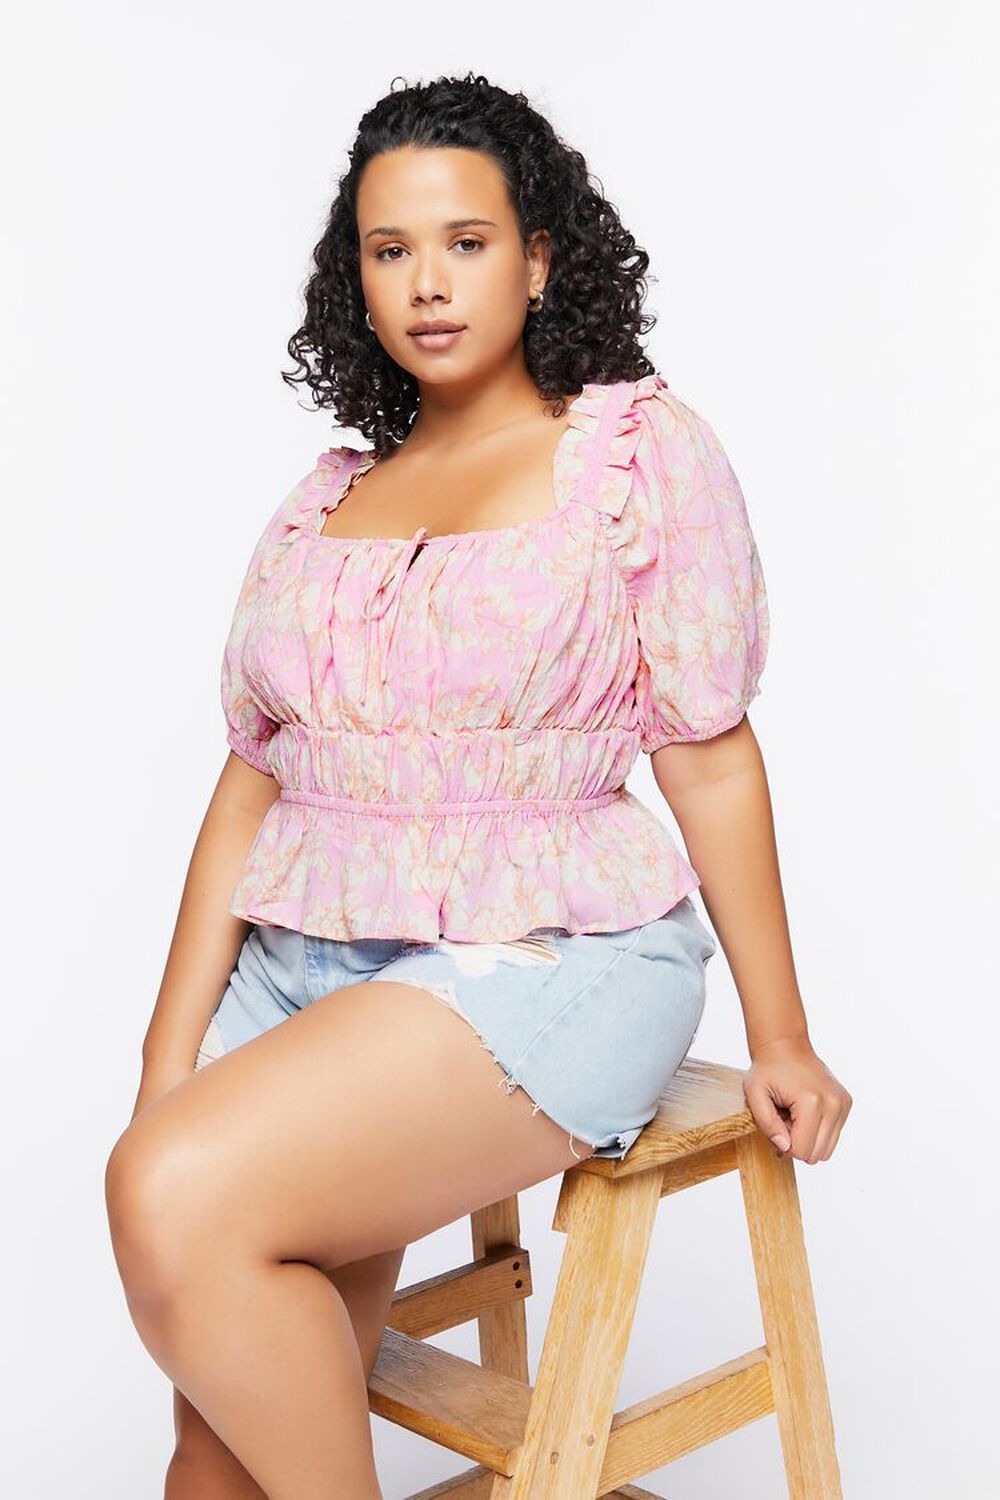 PINK ICING/MULTI Plus Size Floral Print Top, image 1